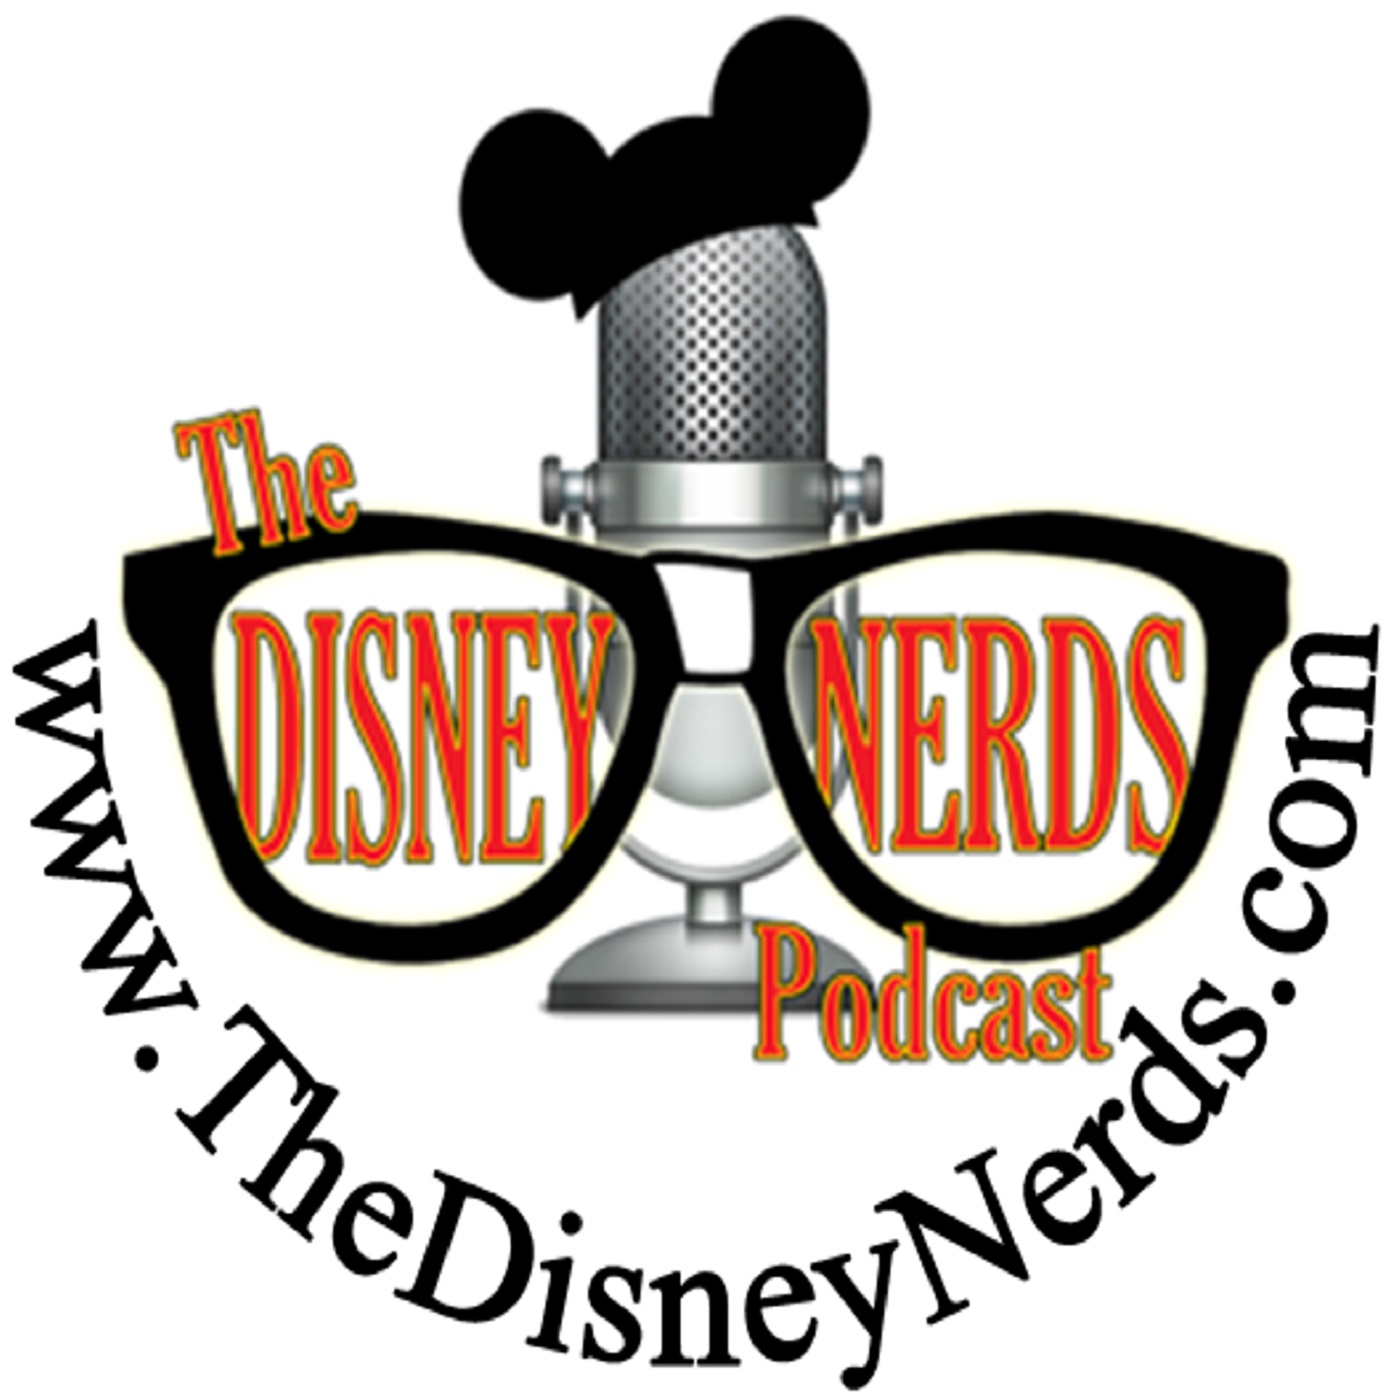 Show # 70 of the Disney Nerds Podcast